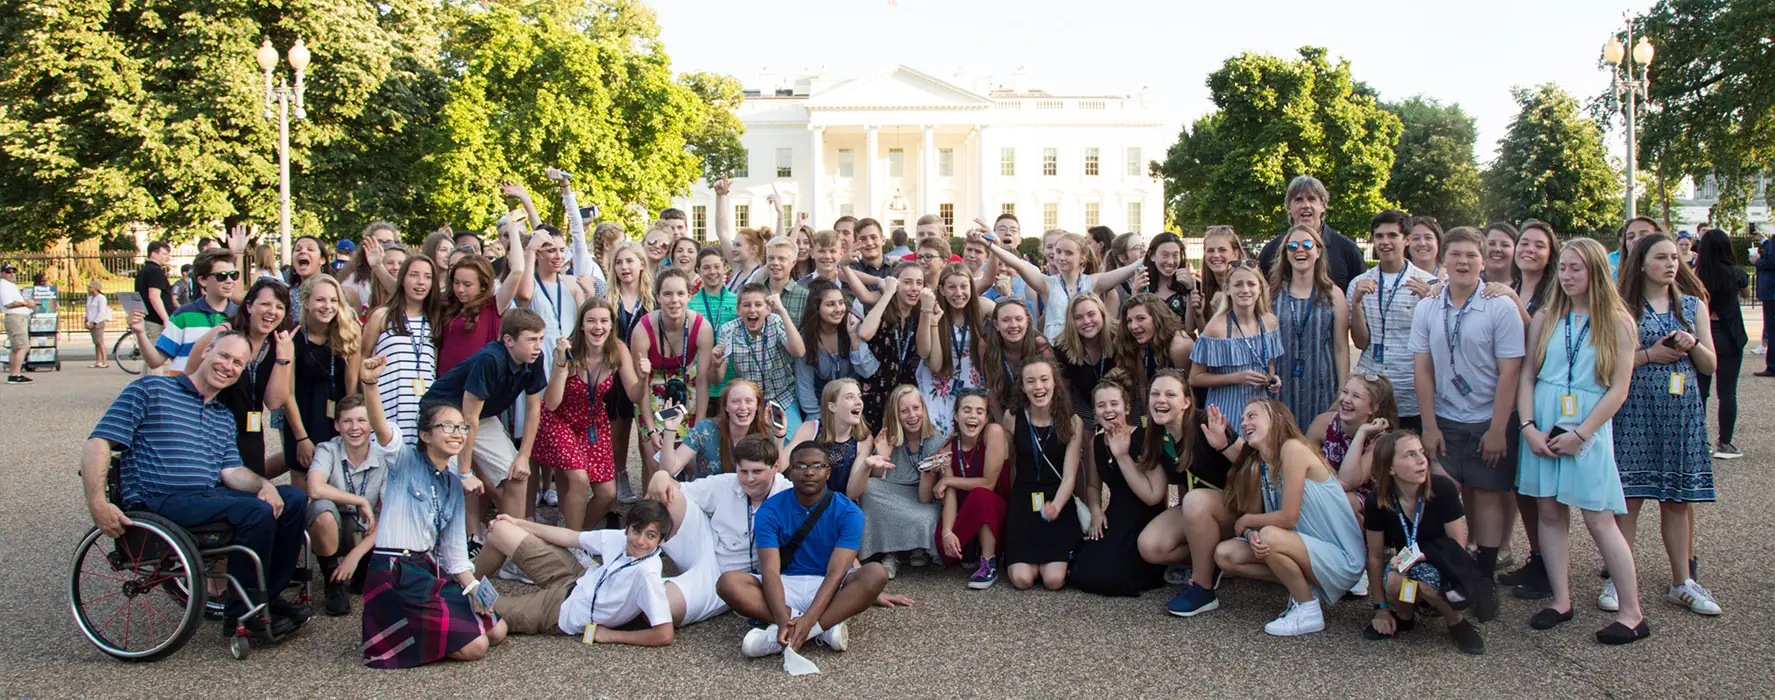 A group of students posing for a photo in front of The White House.